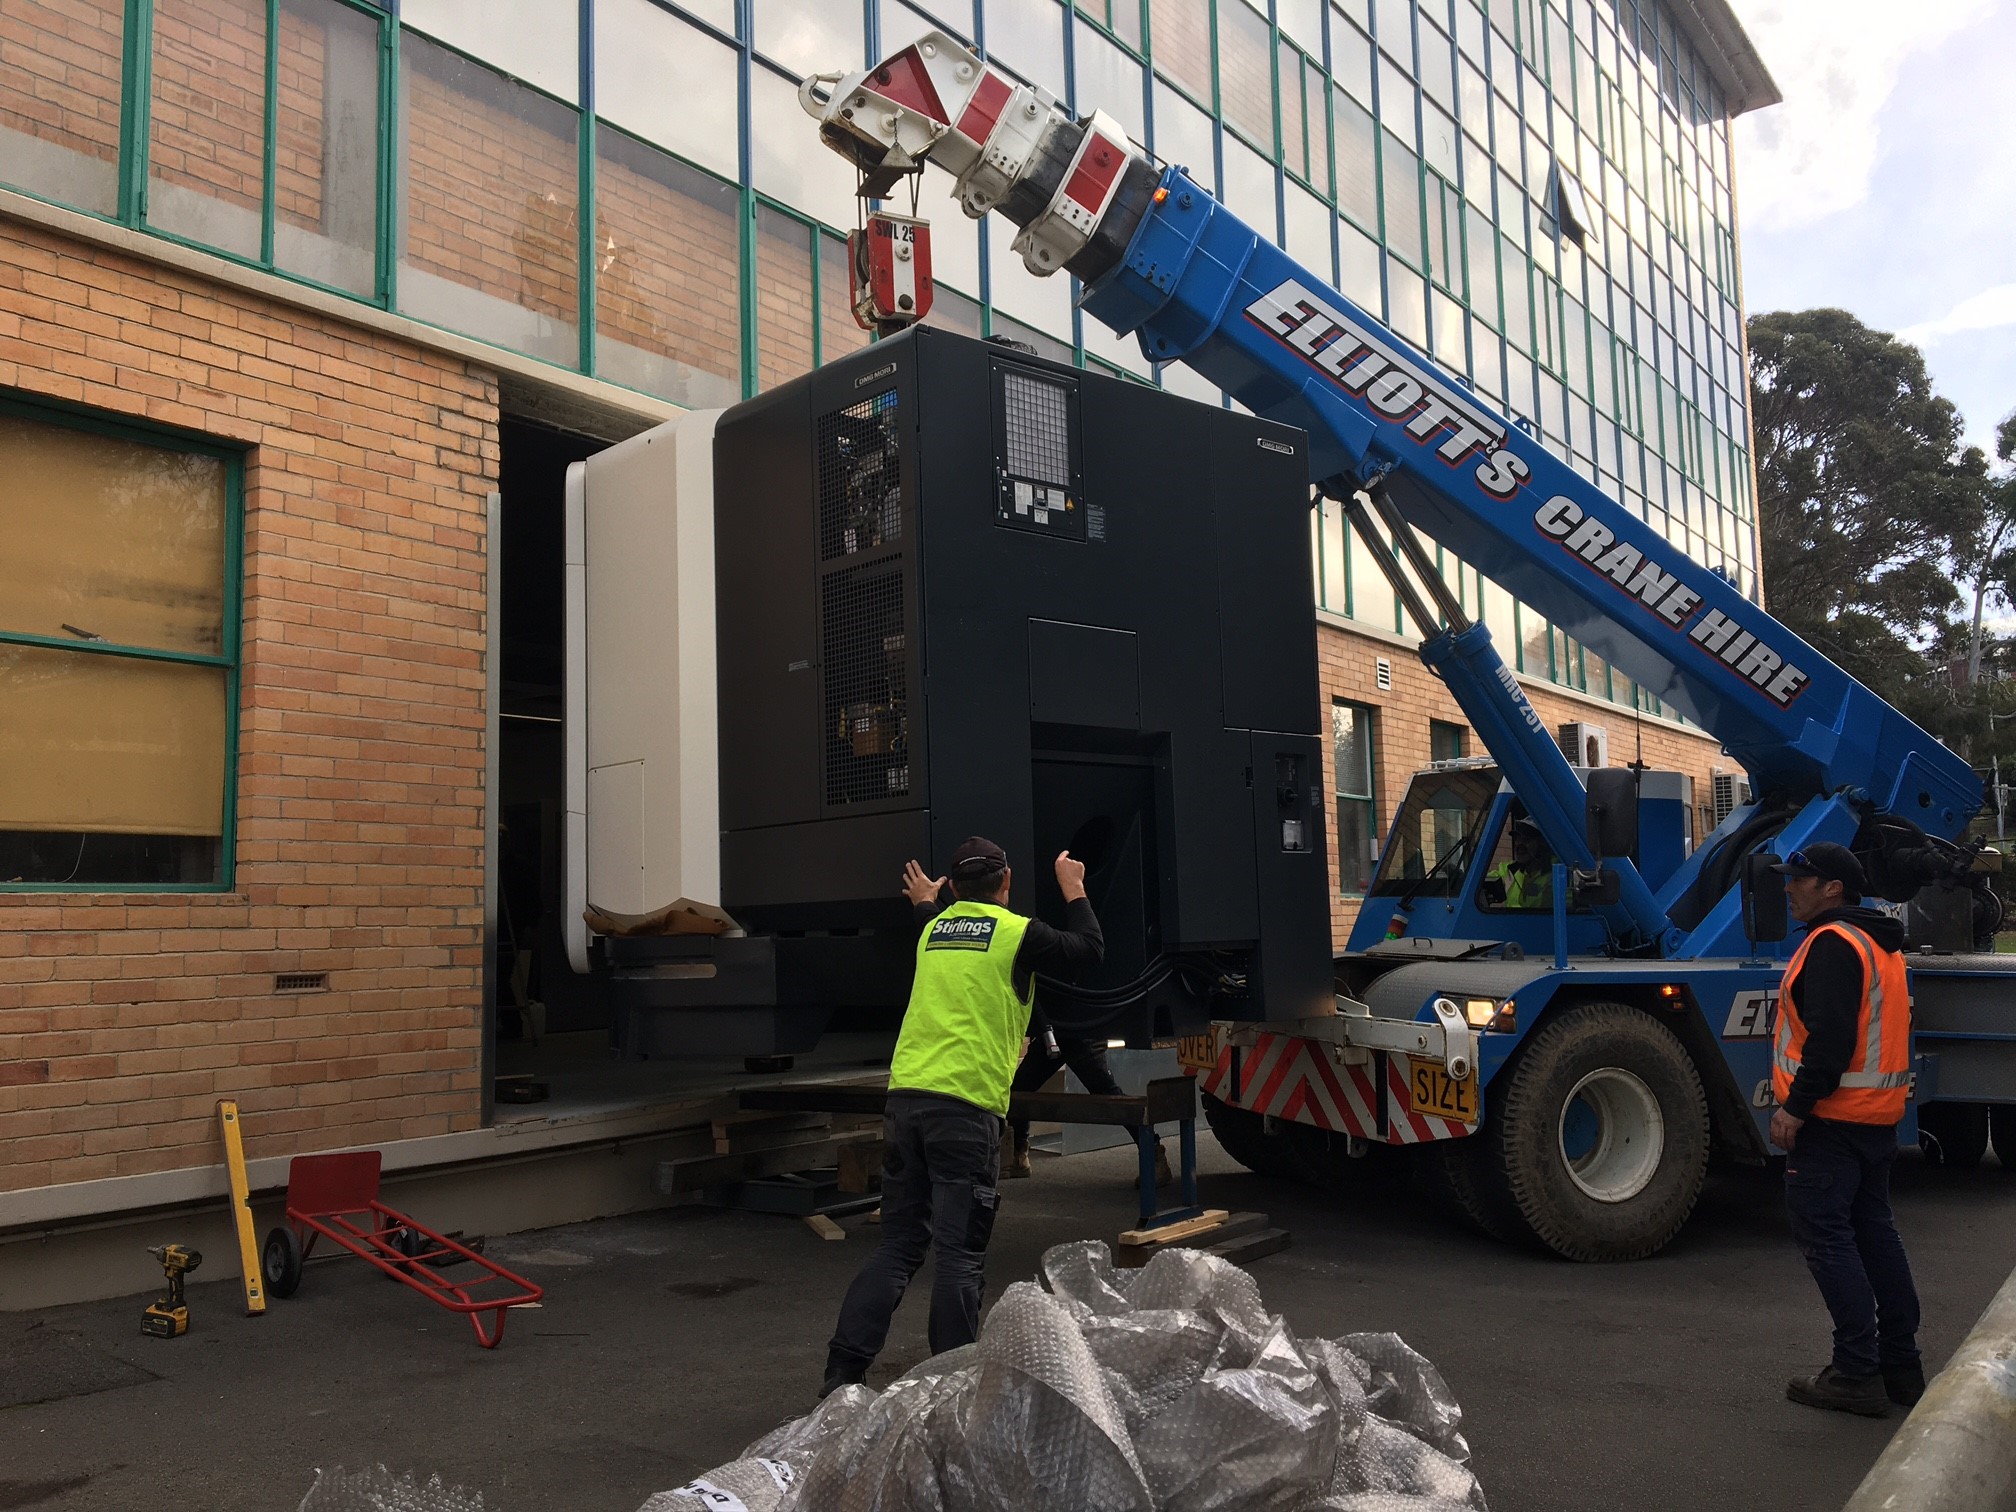 Transfer of the machine into the building